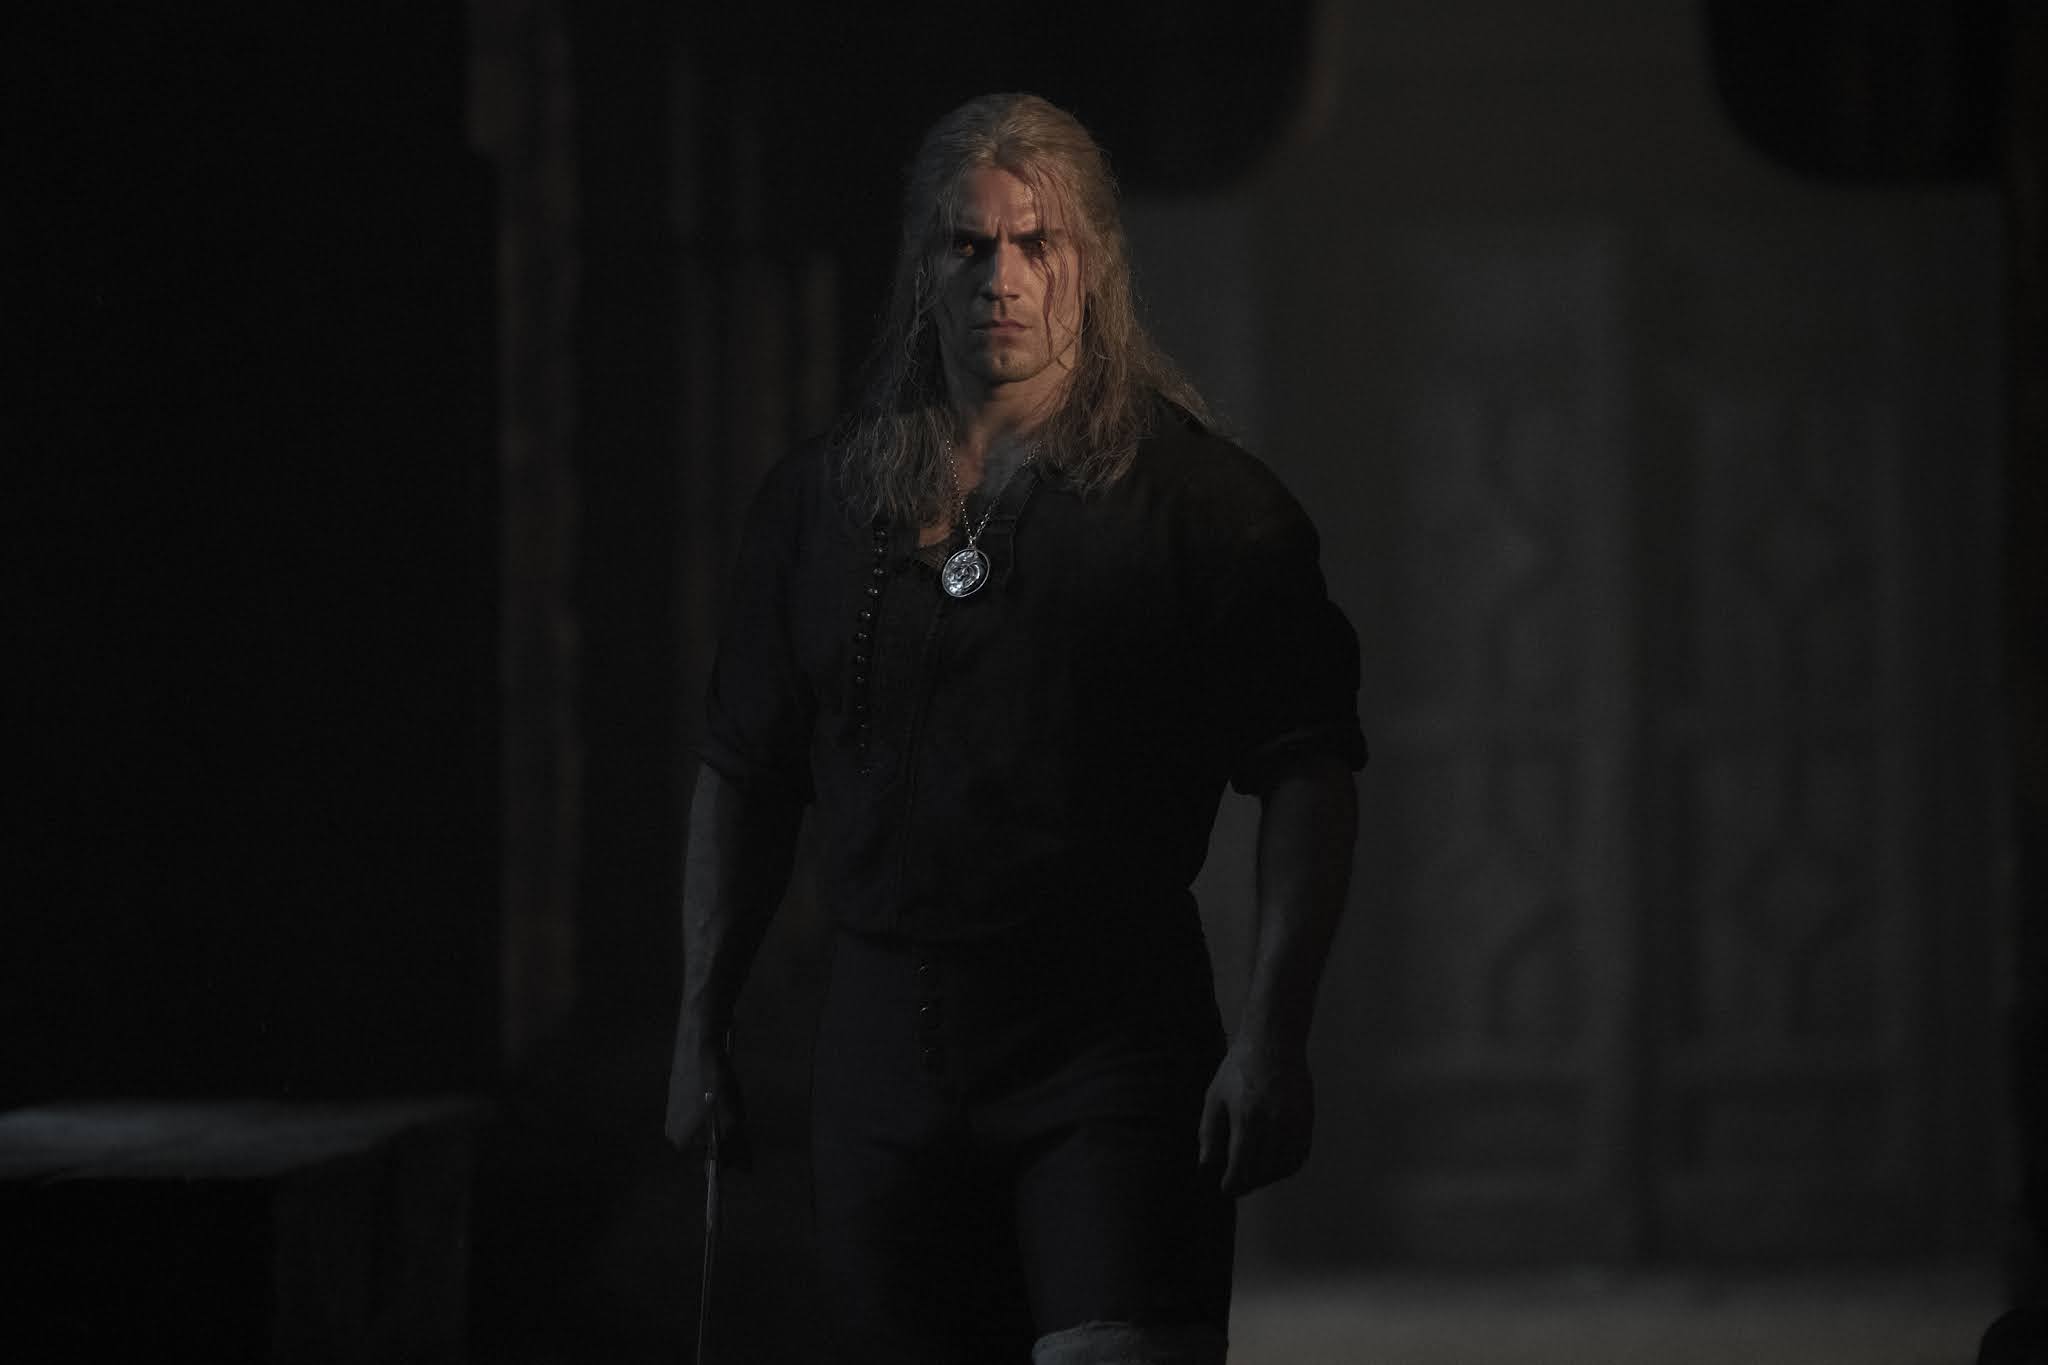 WATCH: Netflix Releases the Official Trailer and Key Art for THE WITCHER Season 2 - Coming December 17, 2021